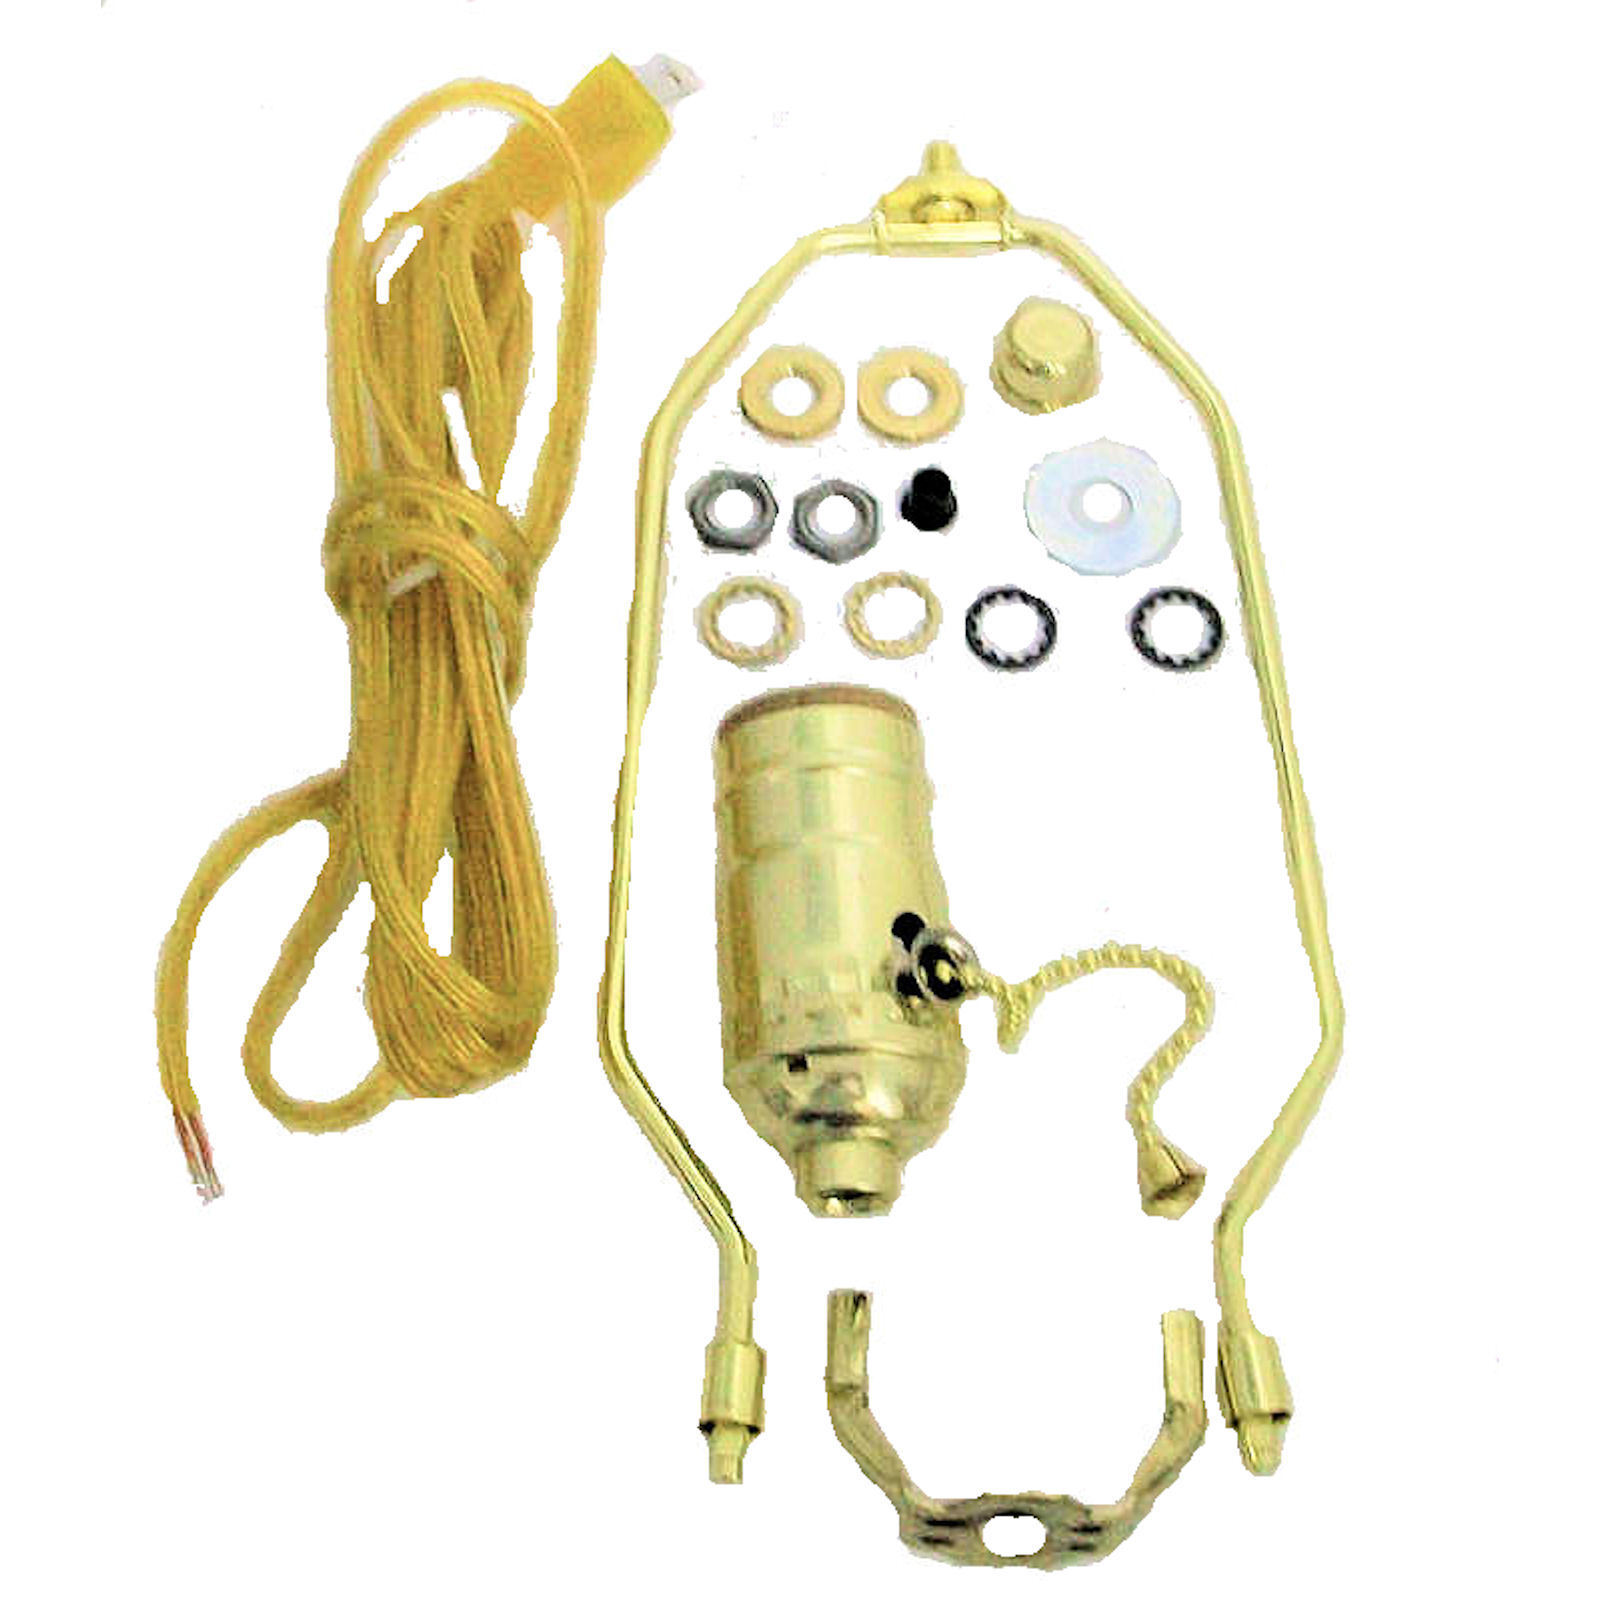 BRASS-PLATED LAMP PART KIT: 8\' GOLD CORD, PULL-CHAIN SOCKET, 9\